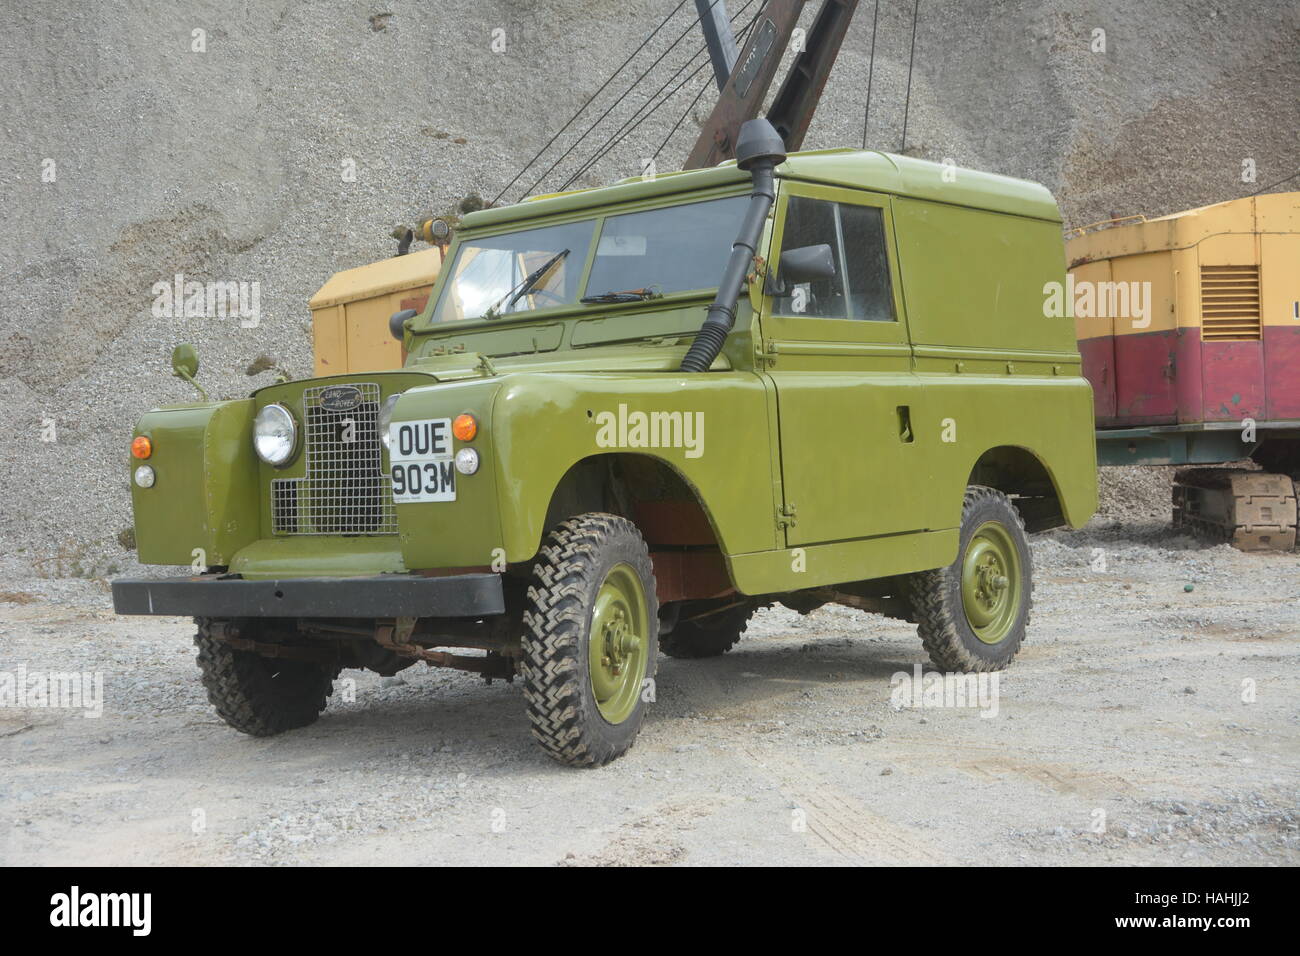 Land rover and cranes in a quarry Stock Photo